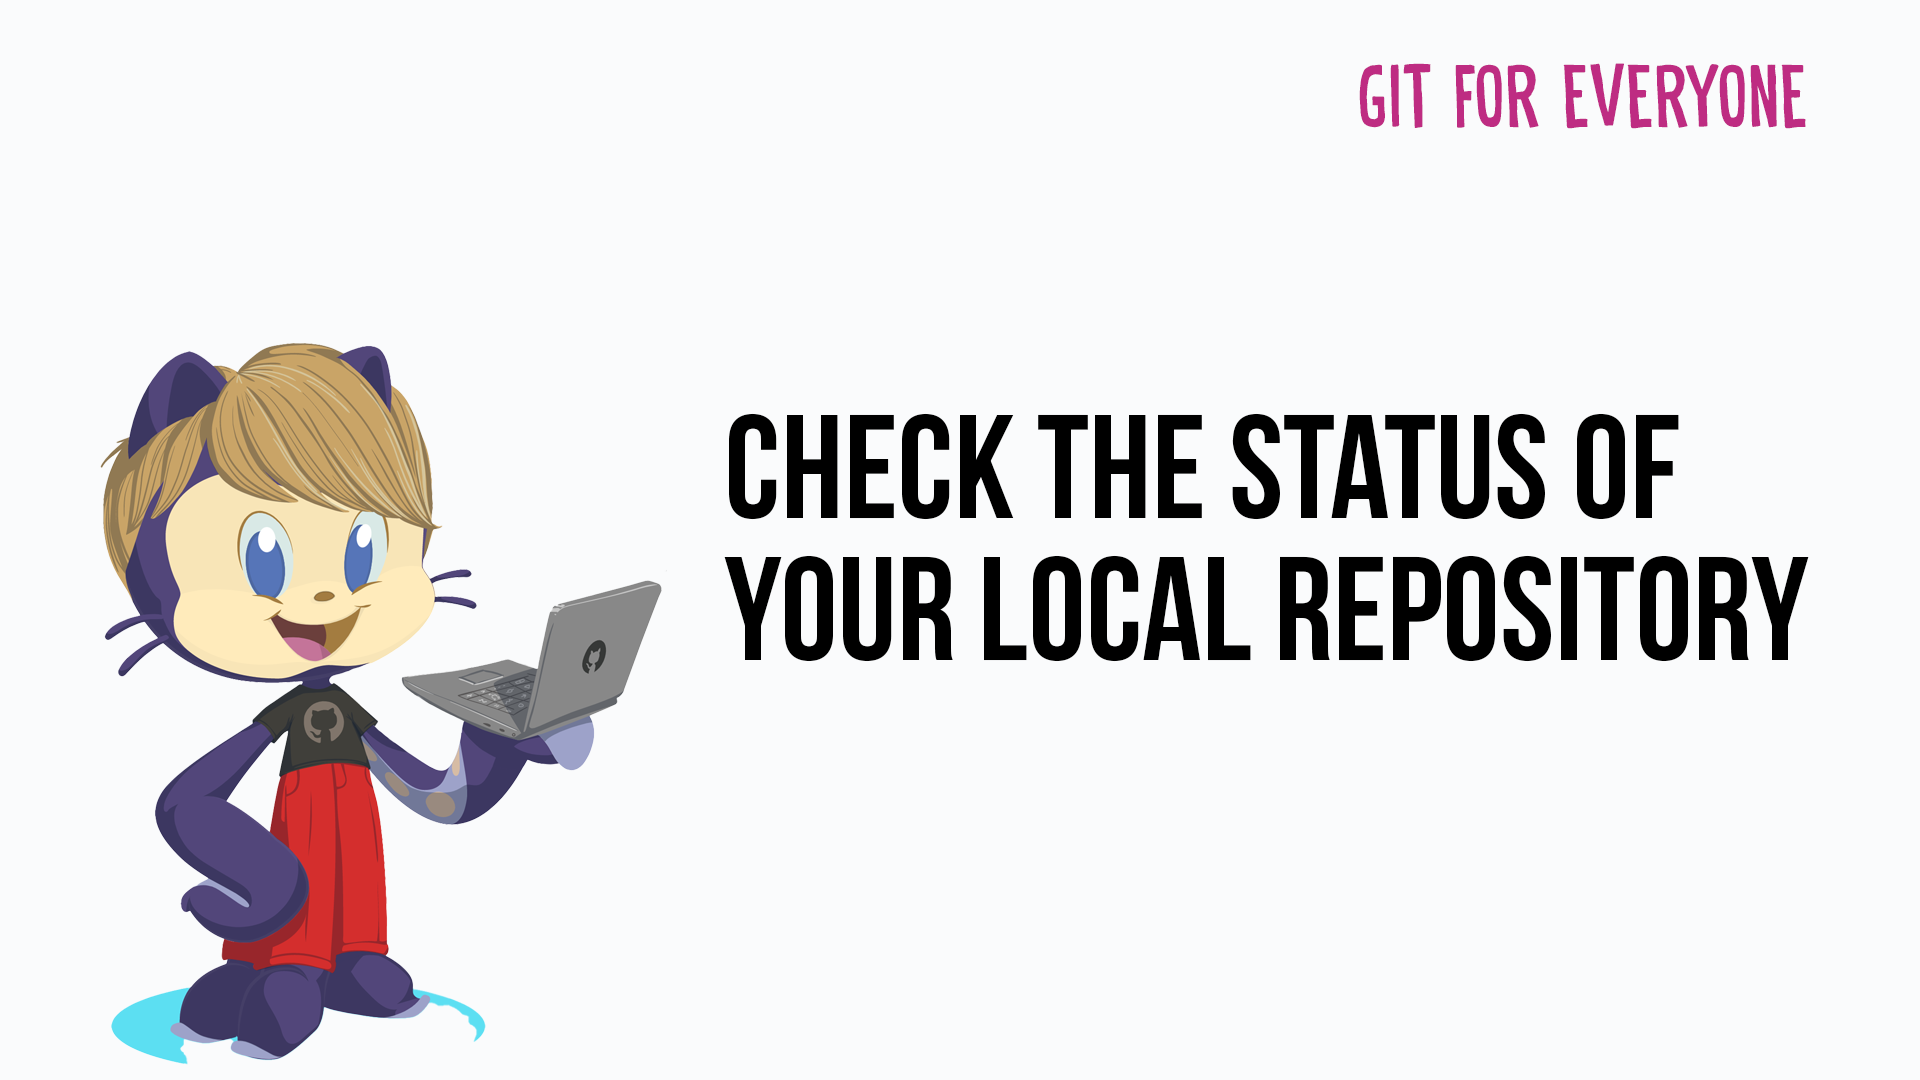 Check the status of your local repository